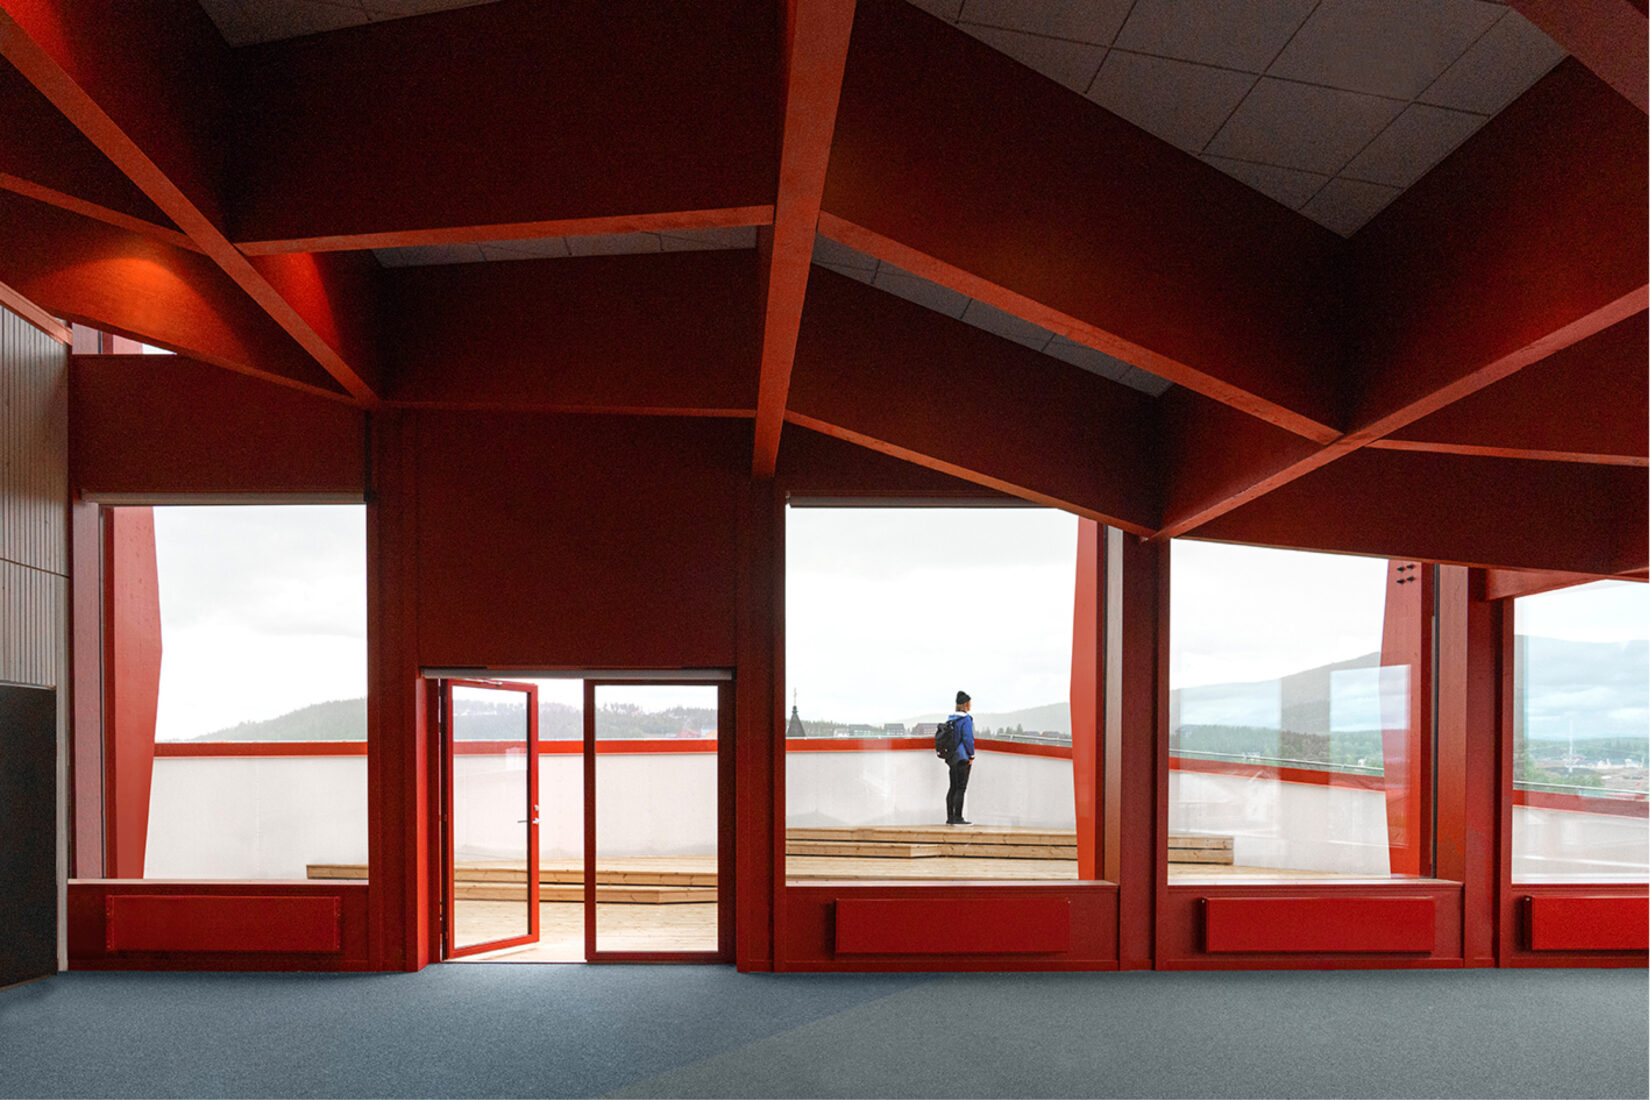 Photo taken from the inside of a contemporary building with a red structure and big windows, with an open door to the terrace in the background.